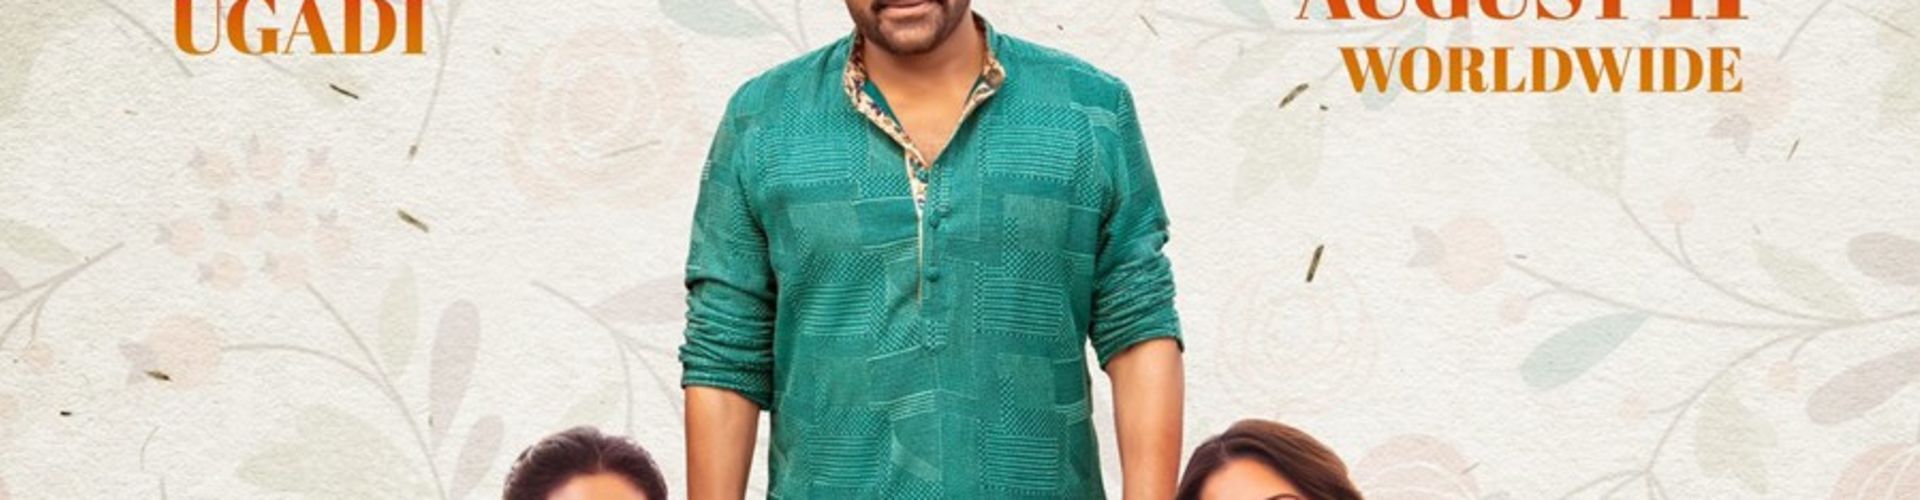 Bhola Shankar Gets A Release Date, Starring Chiranjeevi